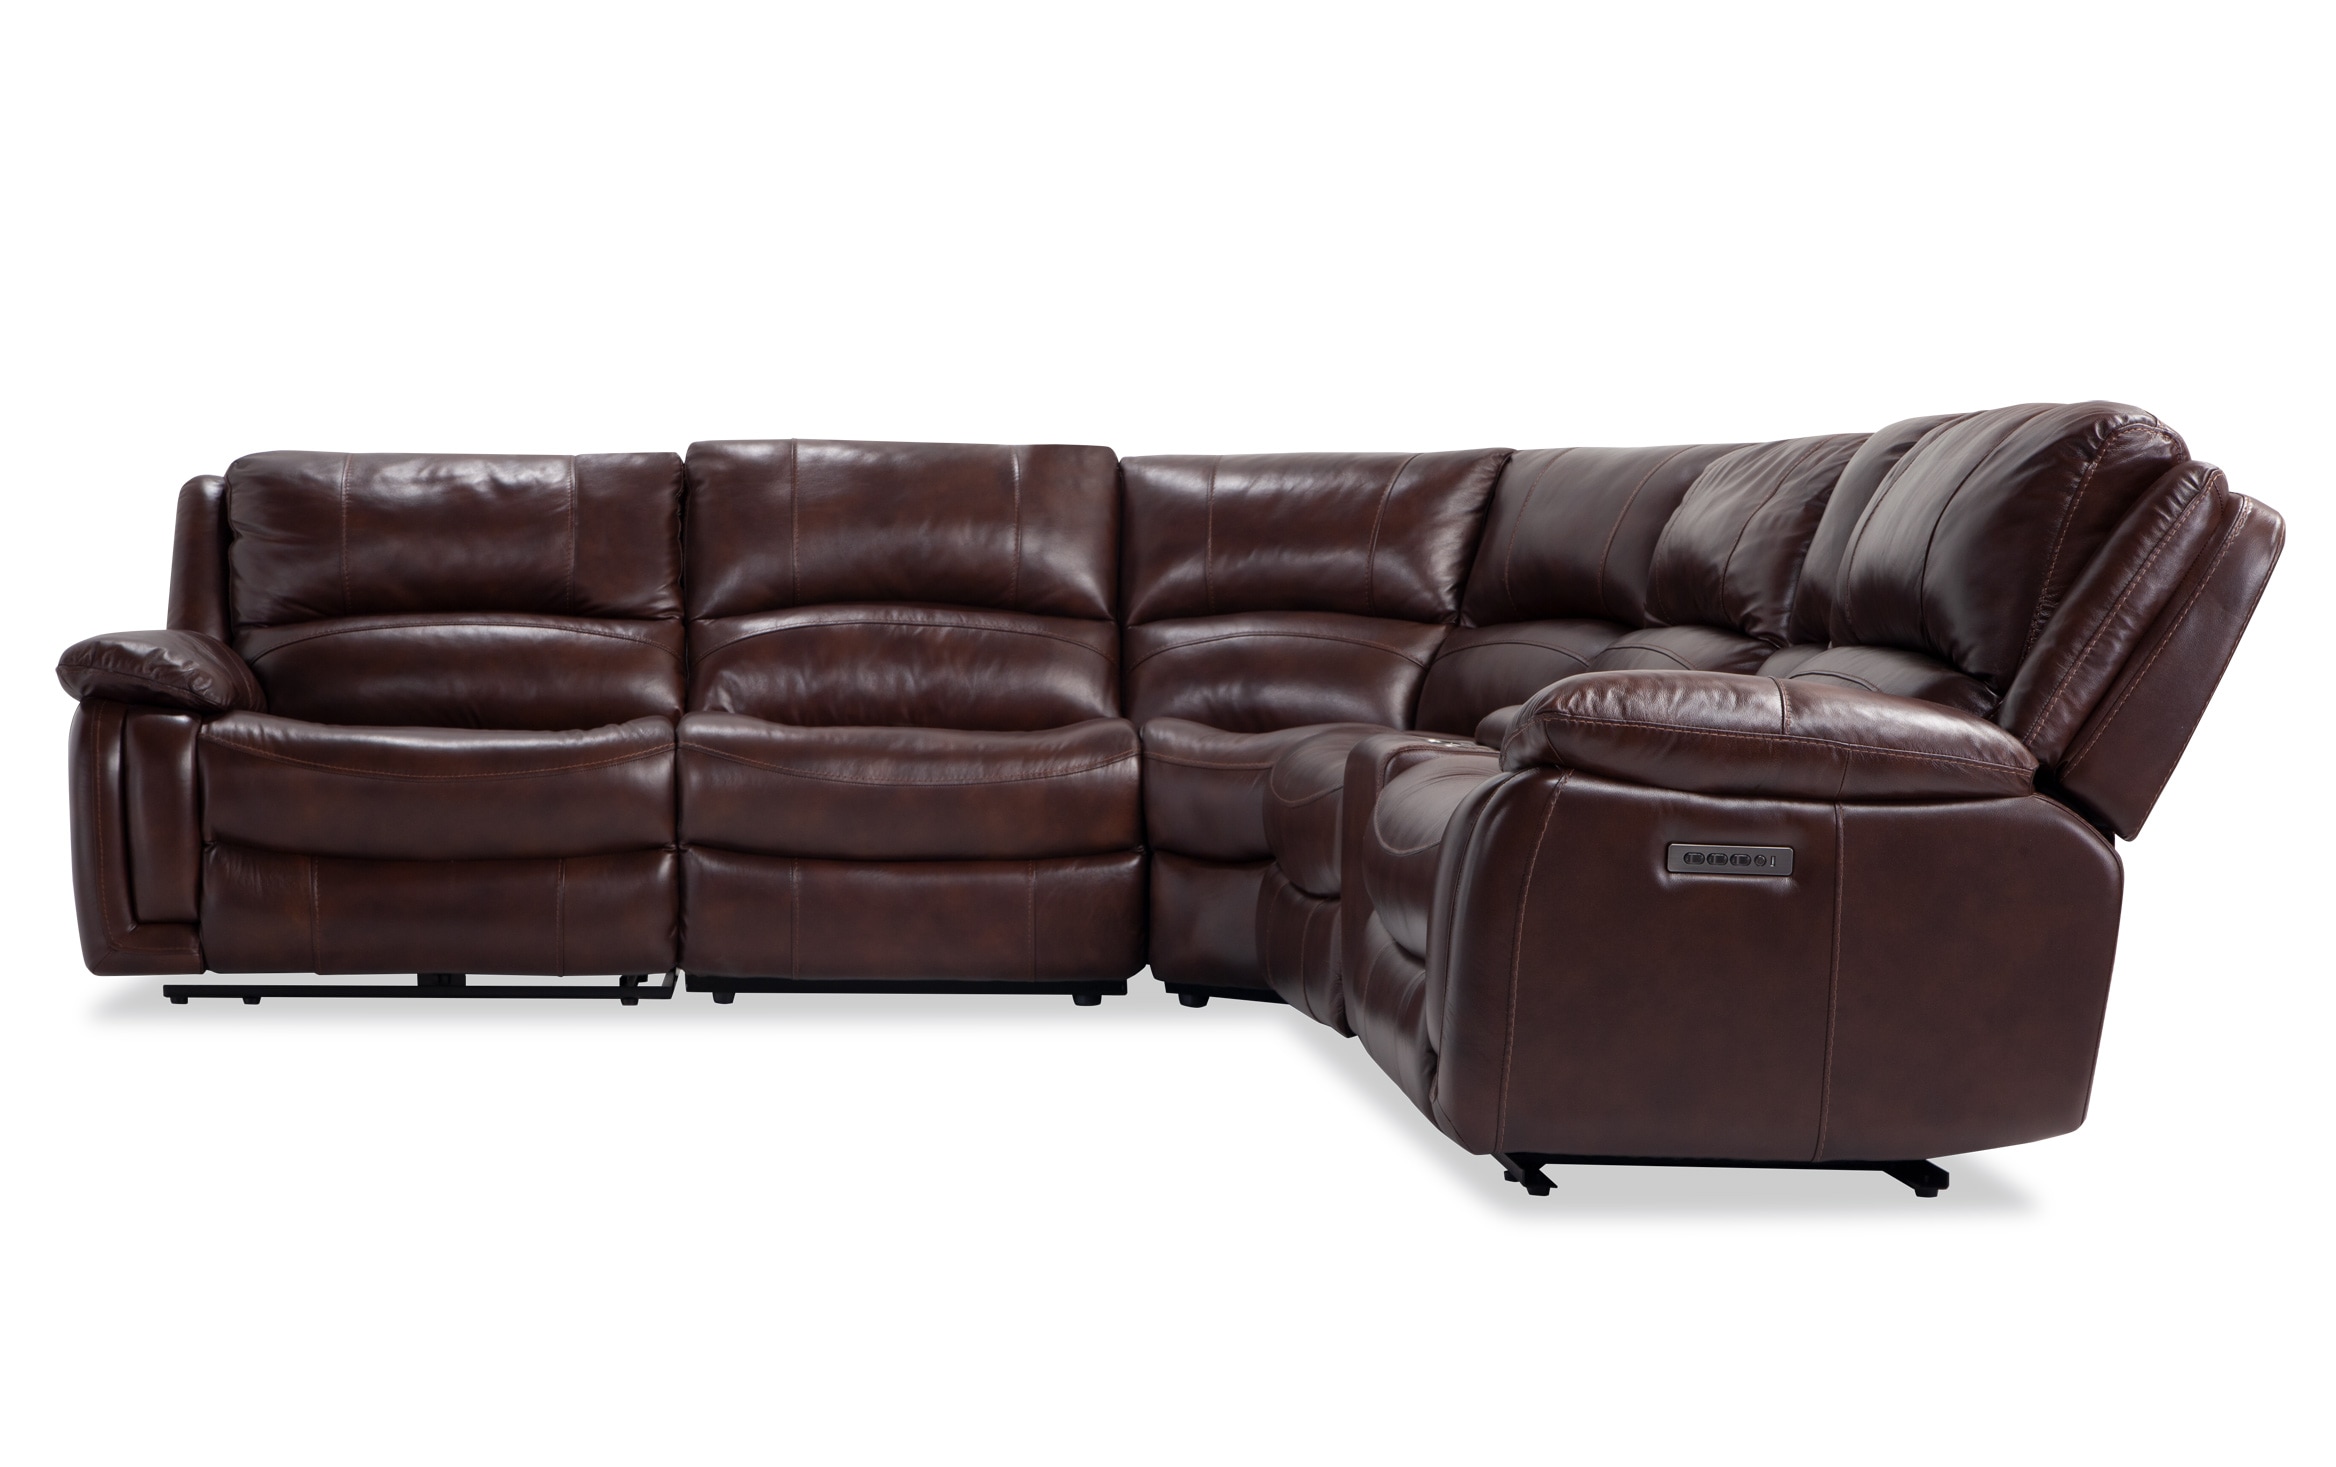 Power Reclining Sectional, Corry 6 Piece Leather Power Reclining Sectional Sofa Brown